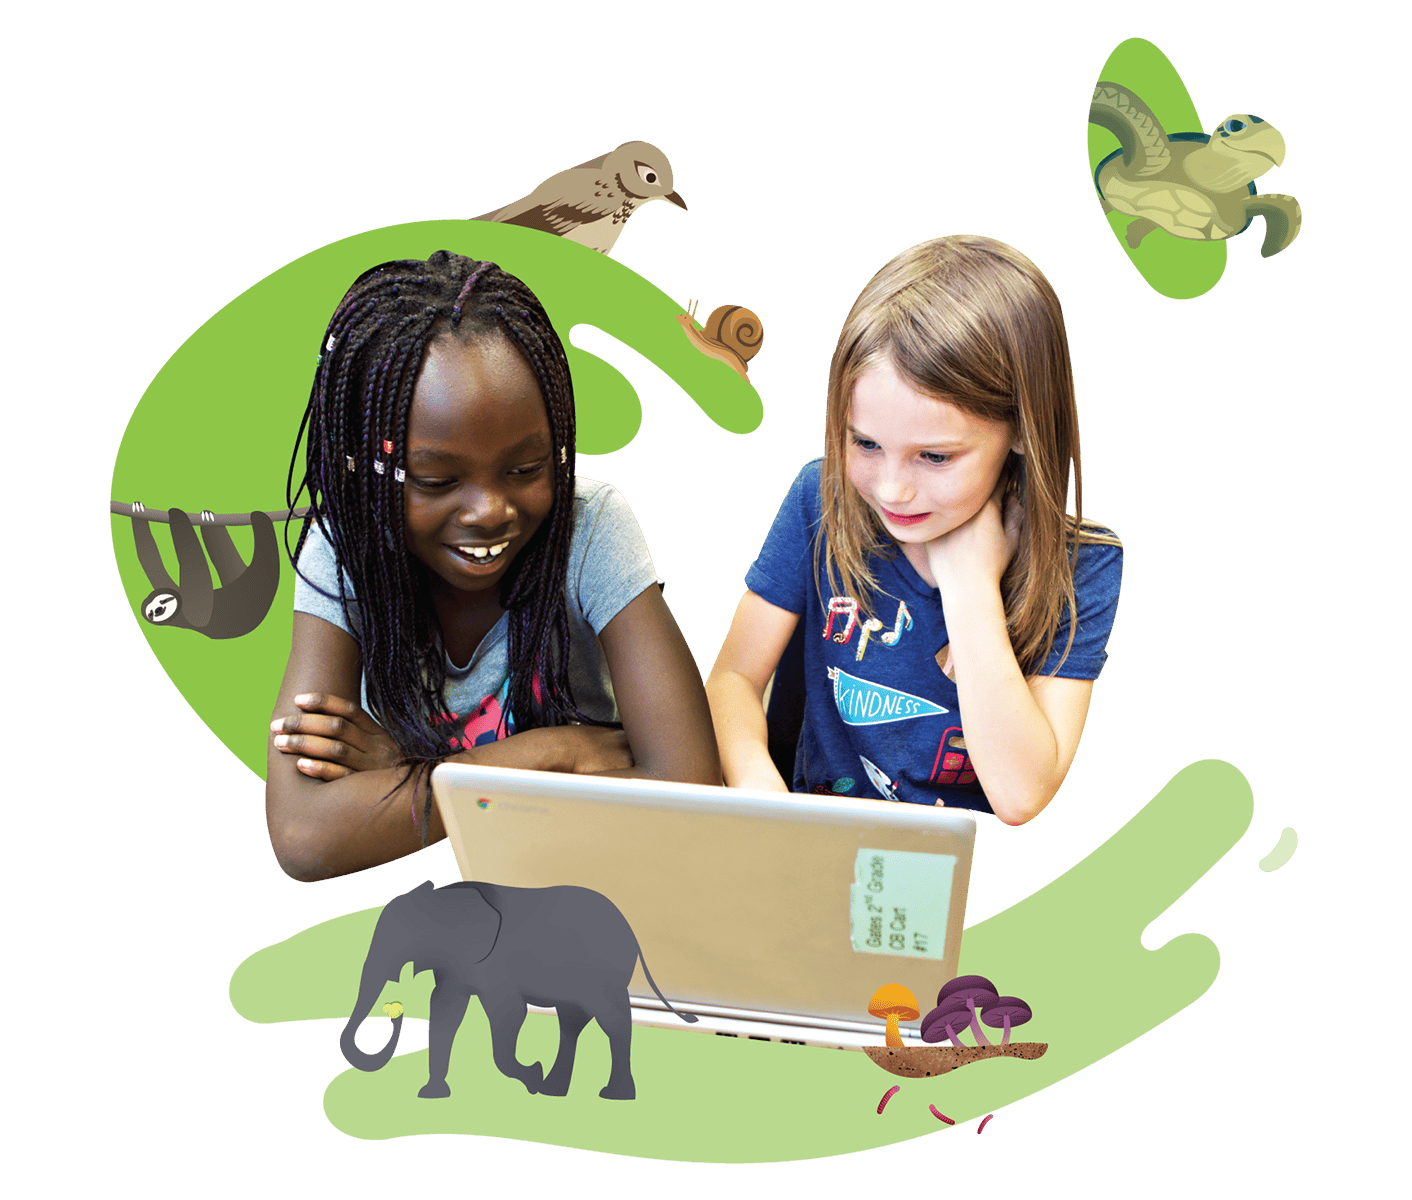 Two young girls, one with braids and one blonde, smiling and looking at a laptop screen together, surrounded by illustrated animals on a green abstract background.